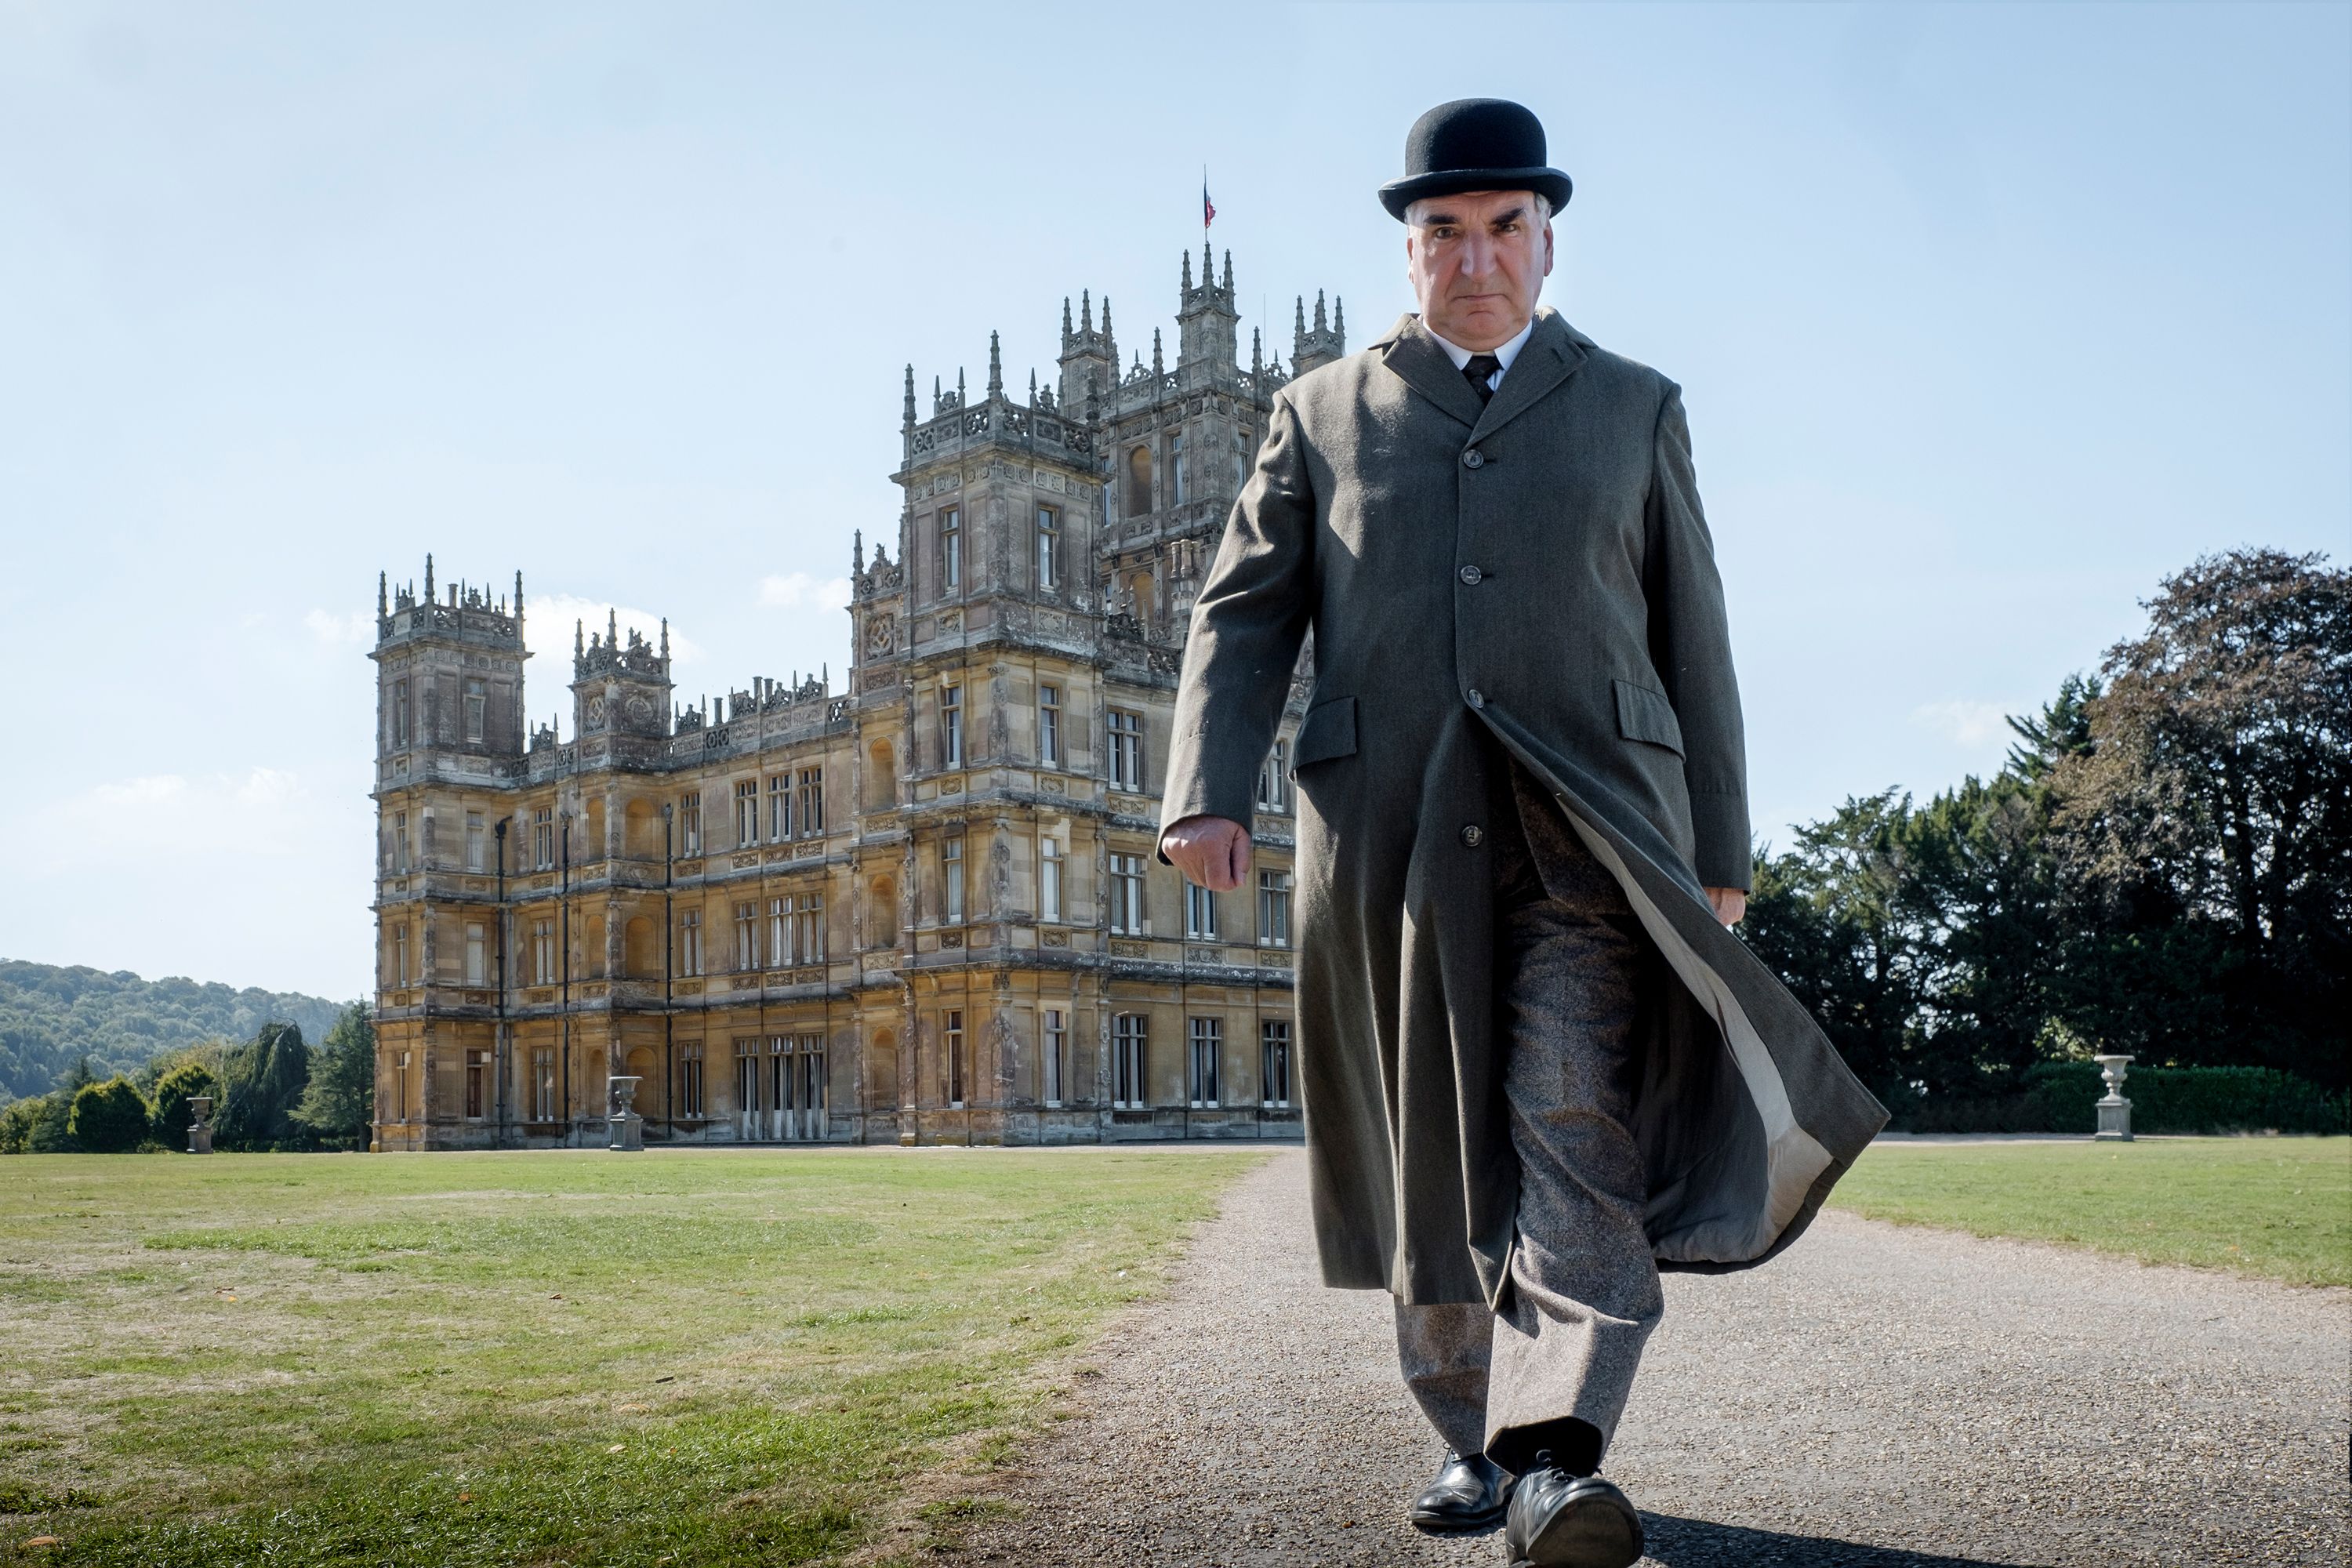 Downton Abbey' Actor Jim Carter Interview on Mr. Carson's Role in the Movie  2019